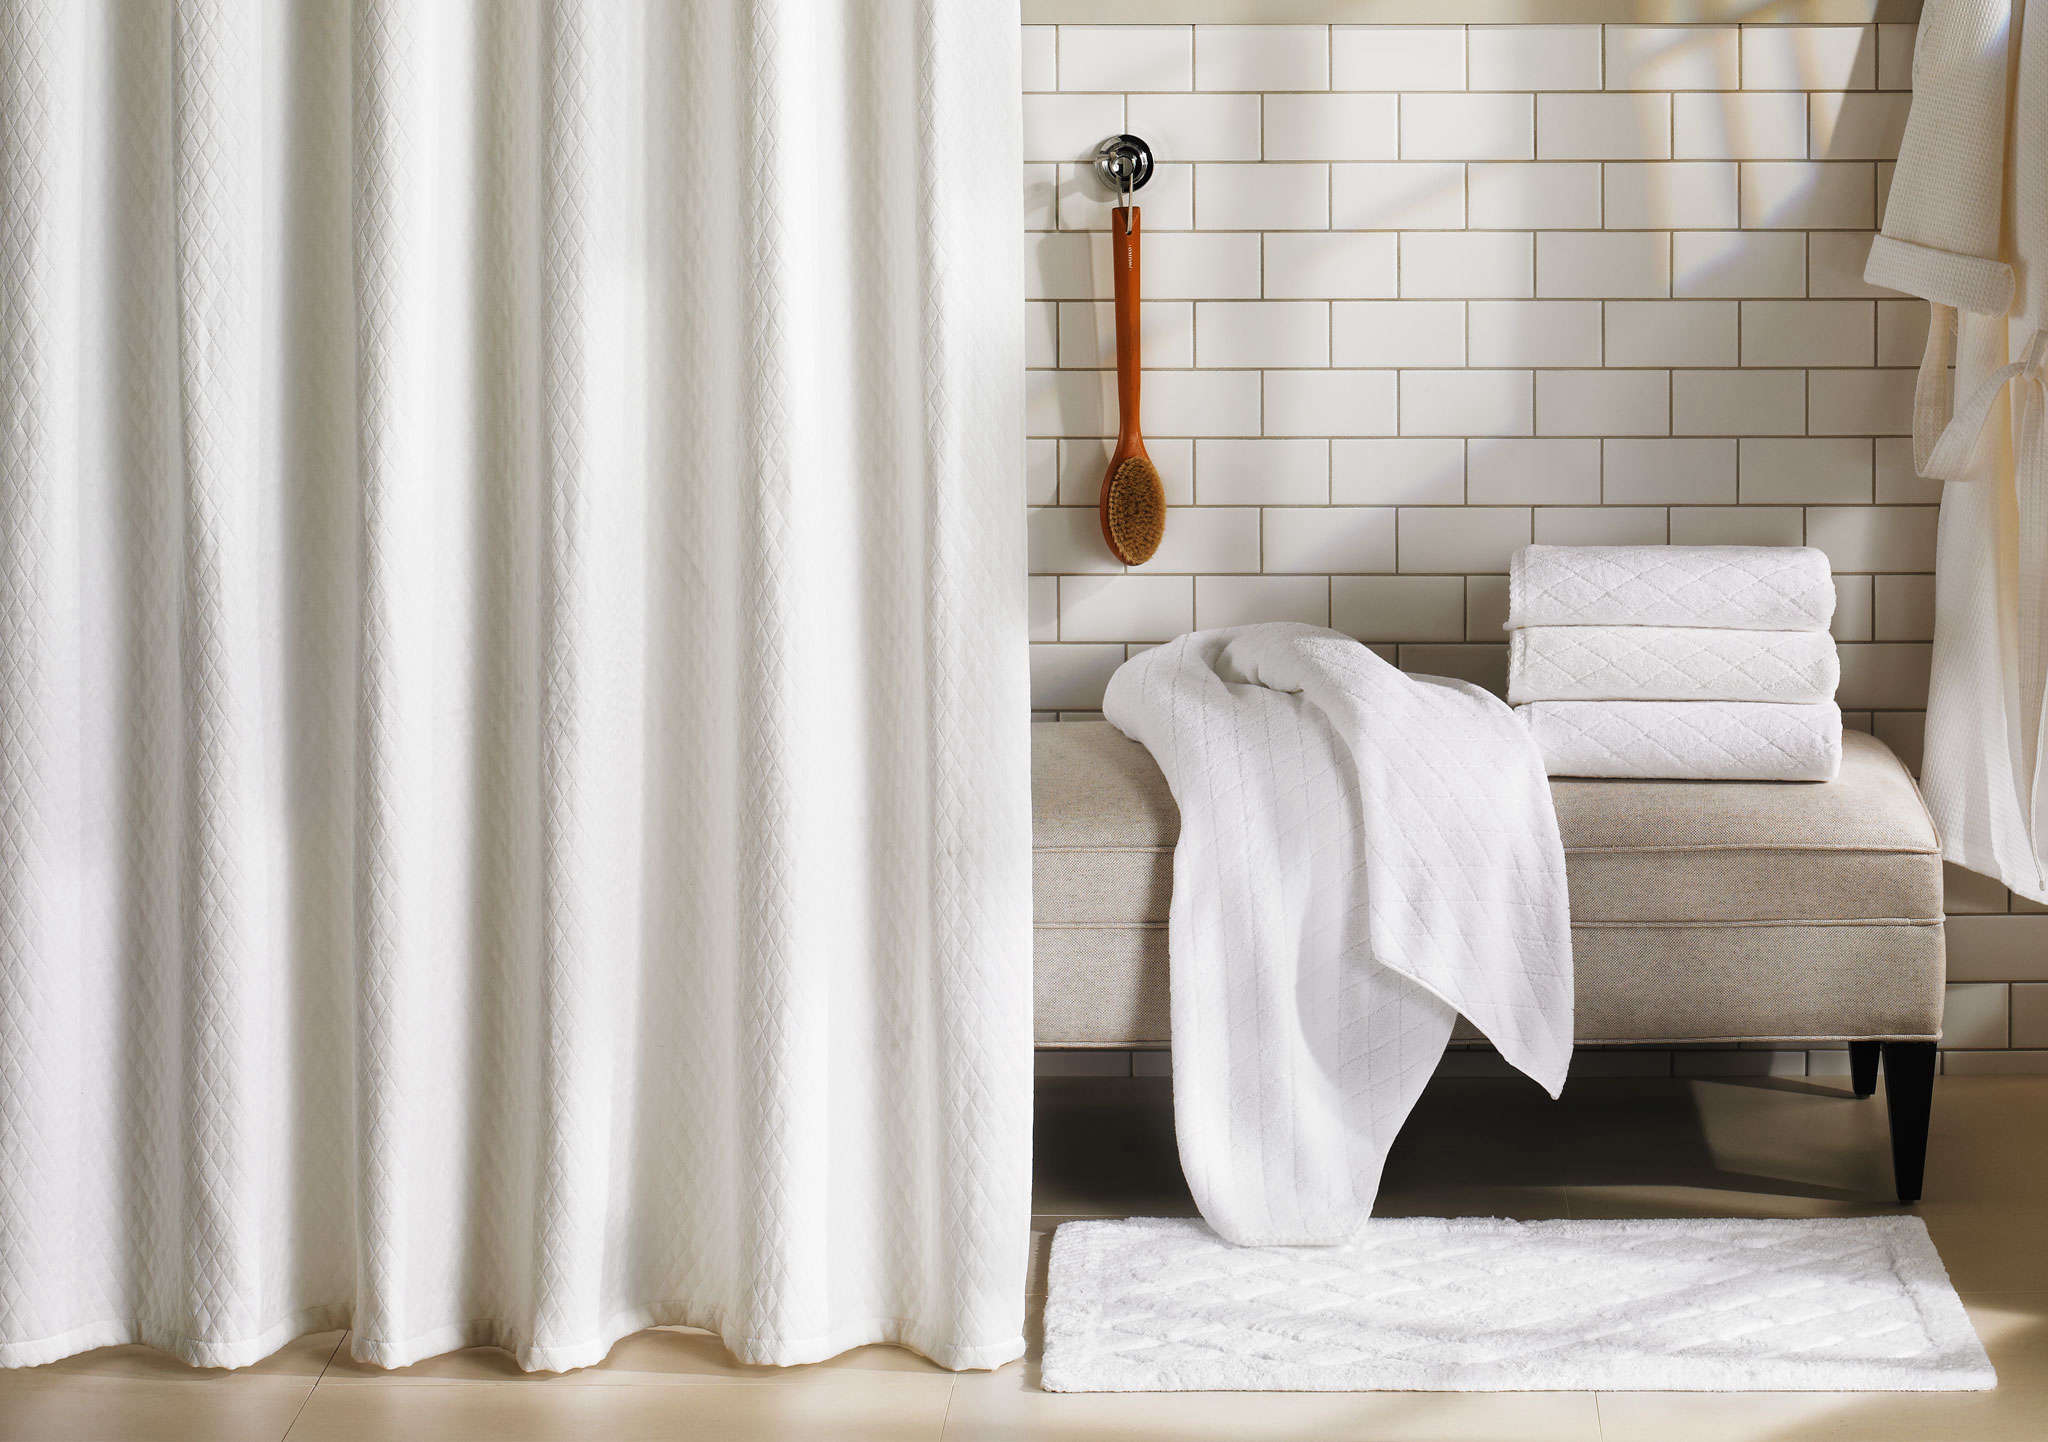 barbara barry classic collection for bedbath&beyond |remodelista 18